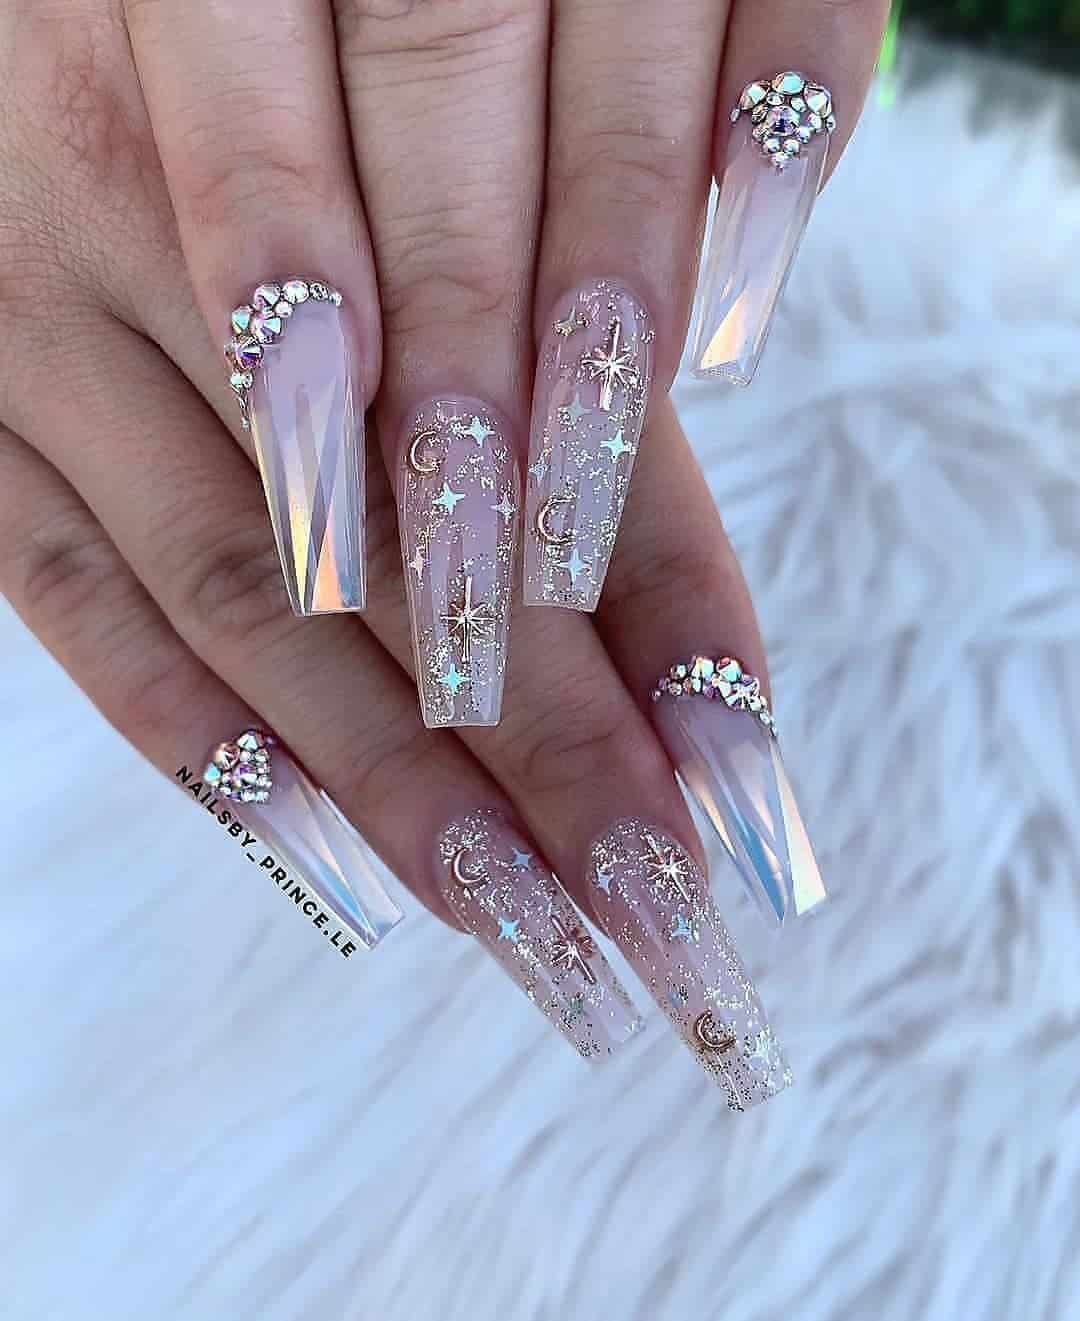 Long Coffin Acrylic Winter Nails